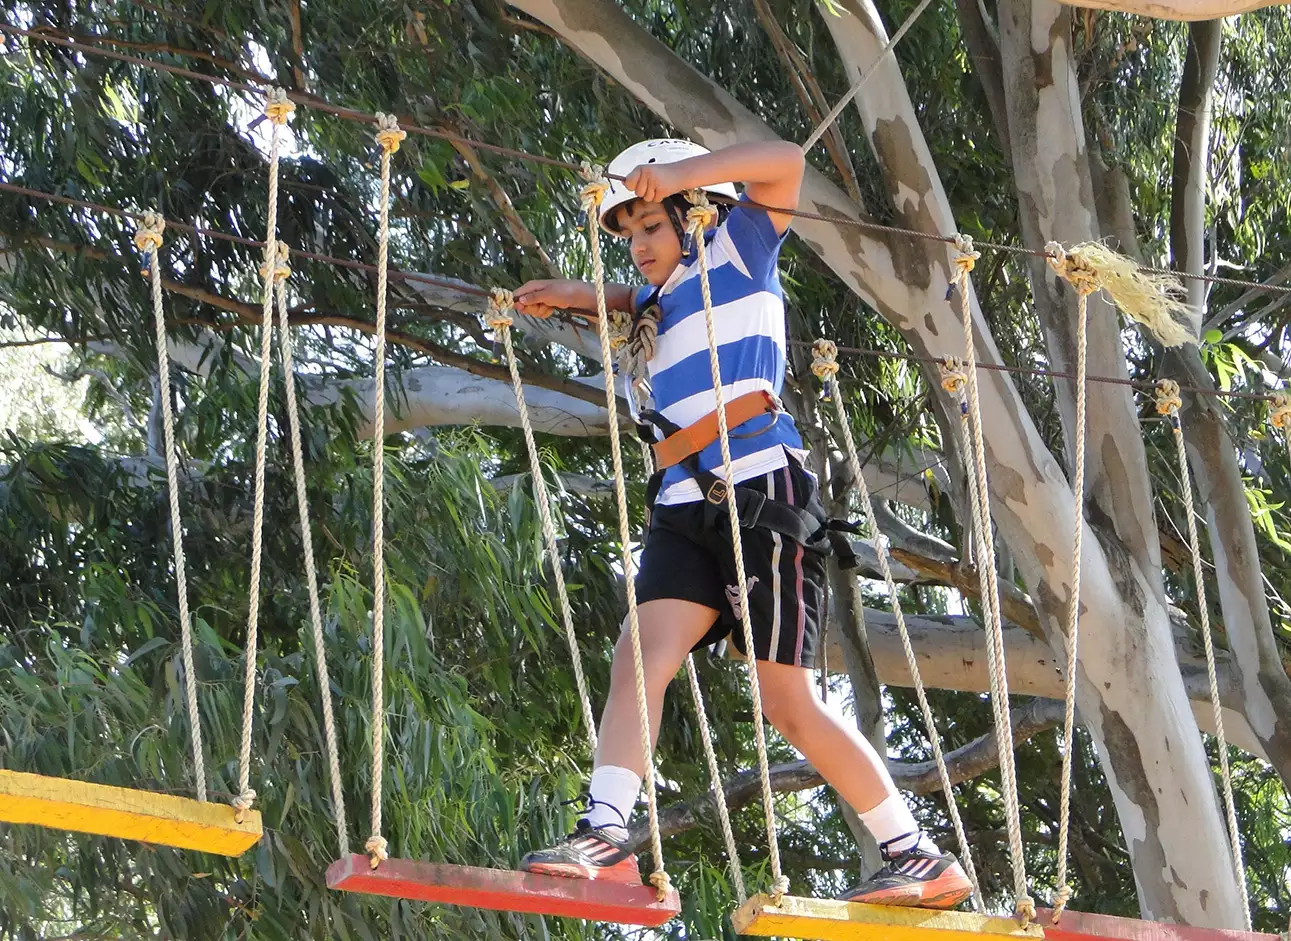 Obstacle Course - Test your skills on exciting challenges